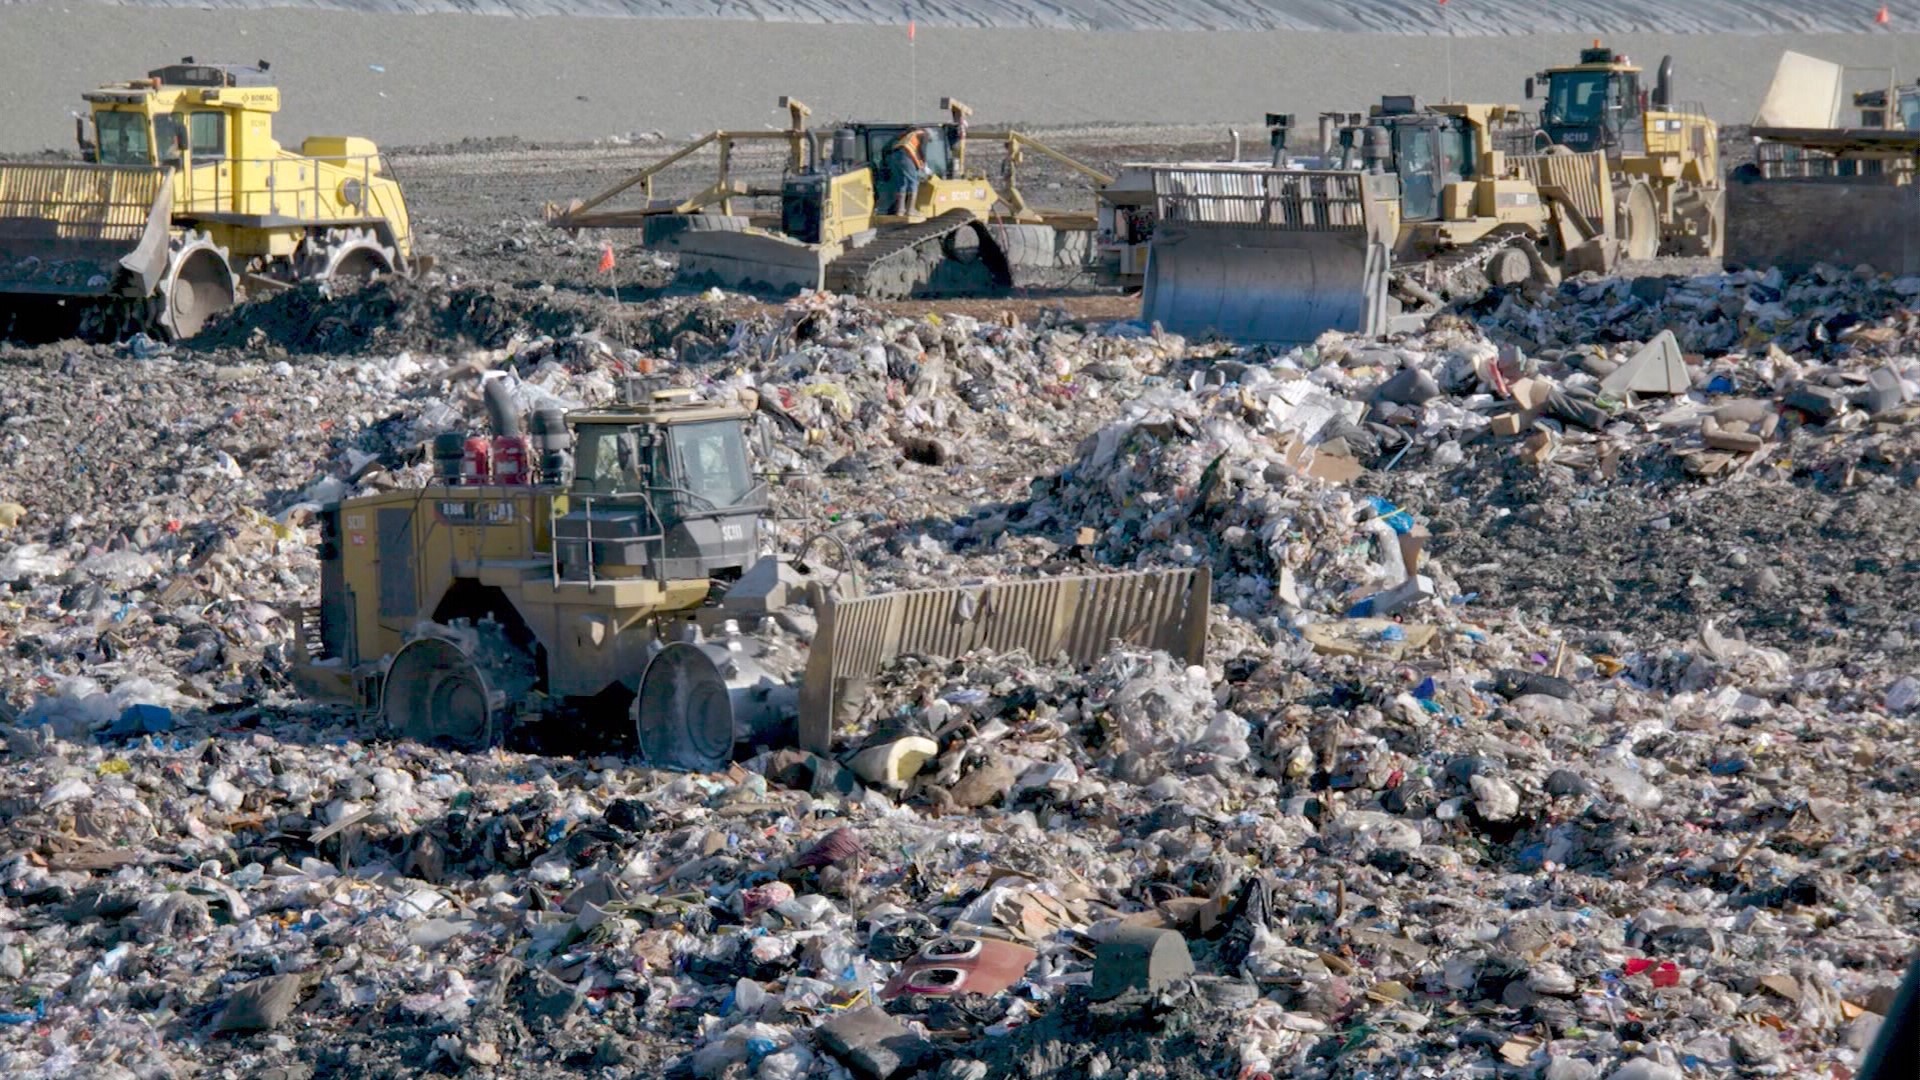 The Washington State Department of Labor and Industries (L&I) is inspecting conditions at a King County landfill with elevated levels of arsenic.